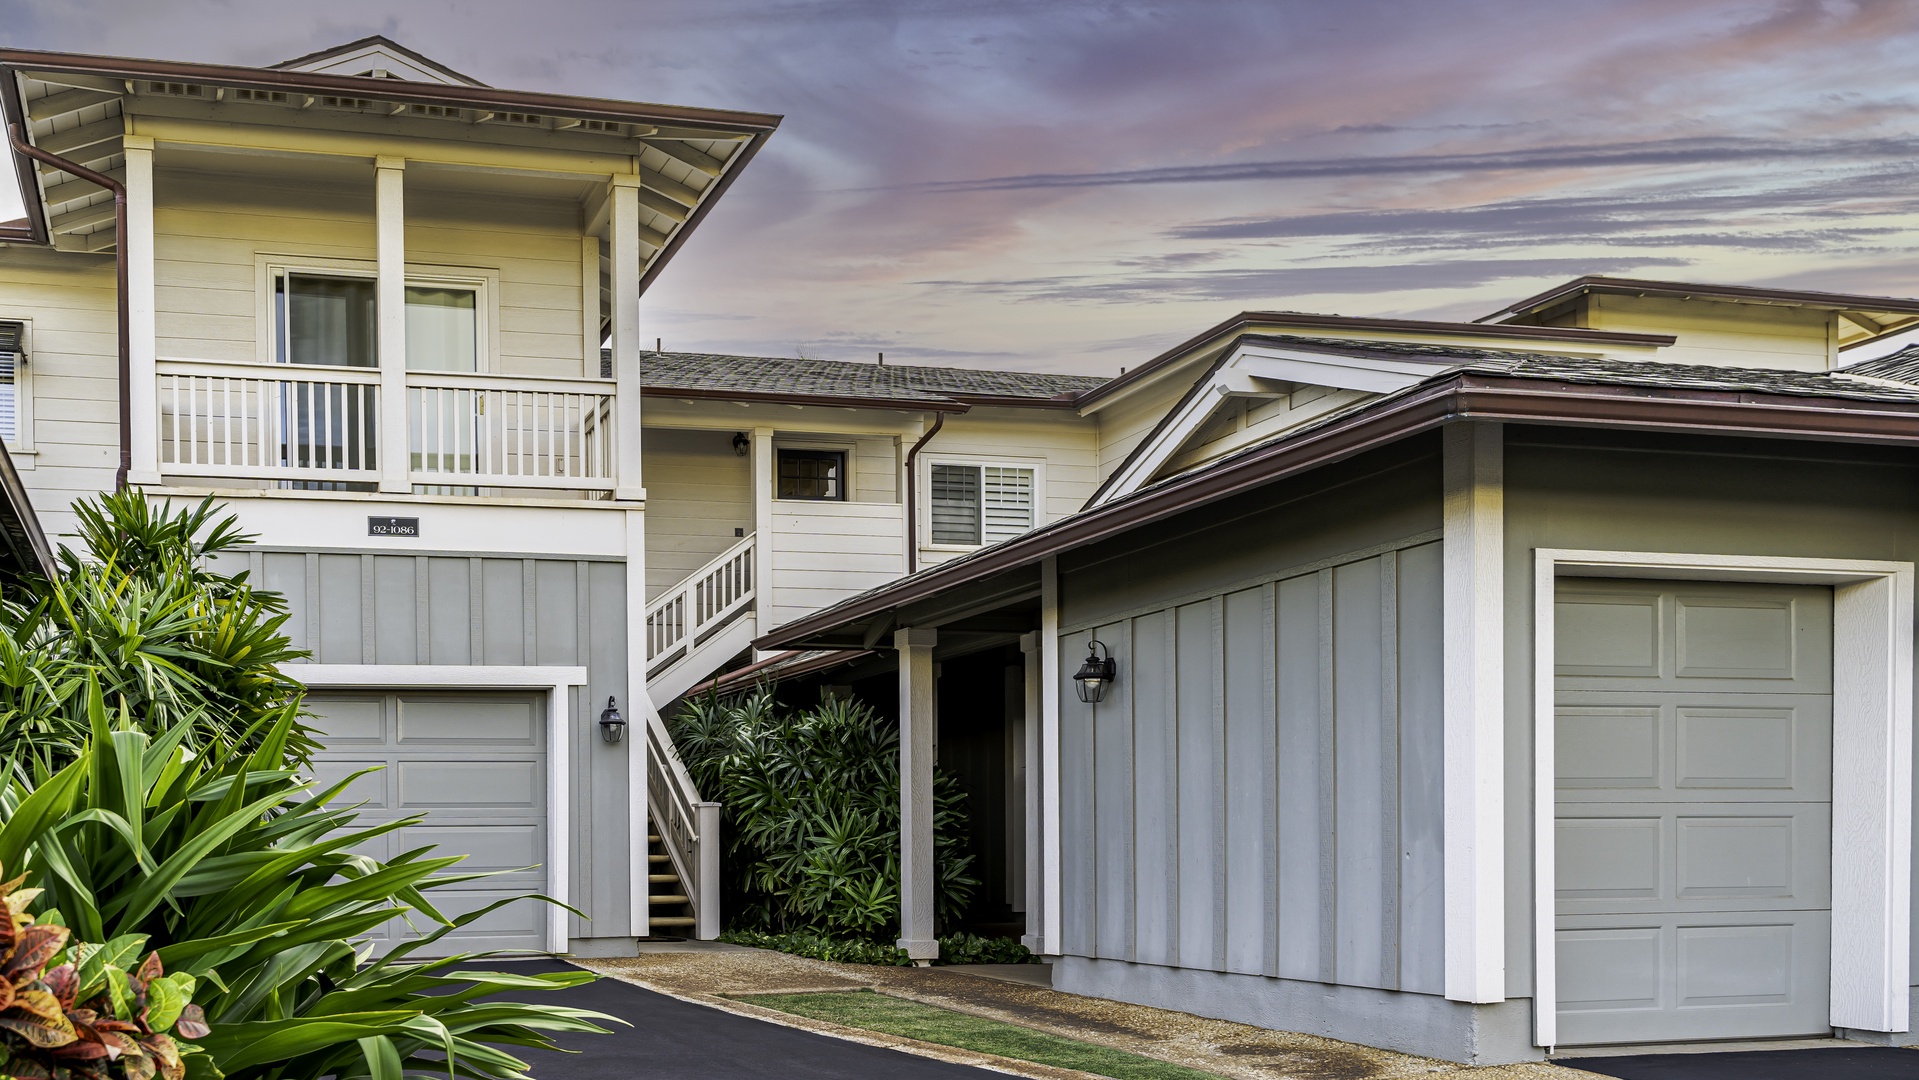 Kapolei Vacation Rentals, Coconut Plantation 1086-4 - A view of the home from the street.